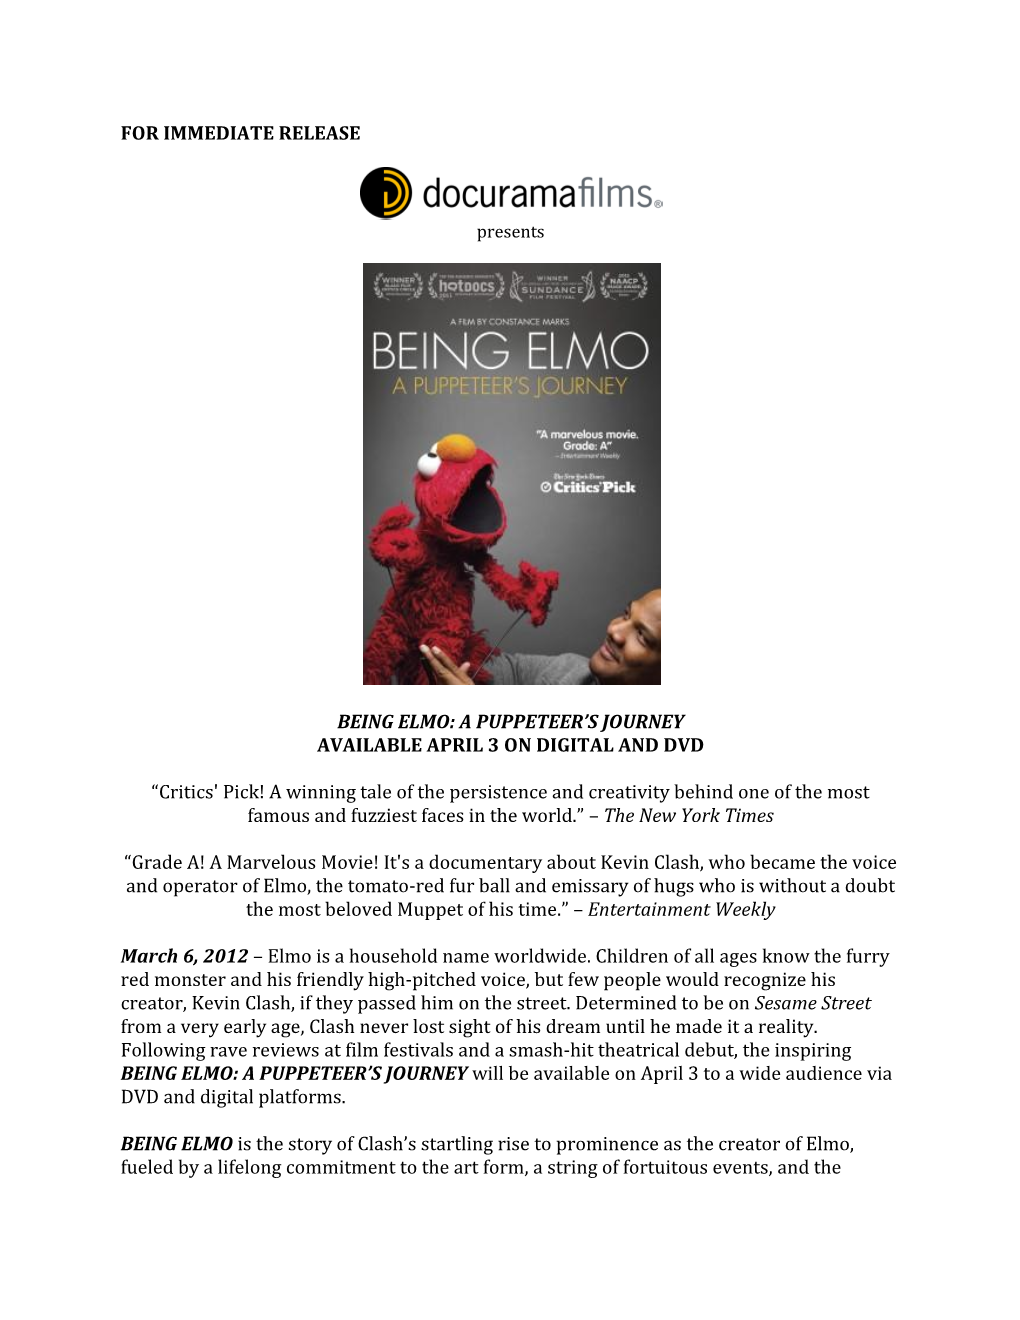 For Immediate Release Being Elmo: a Puppeteer's Journey